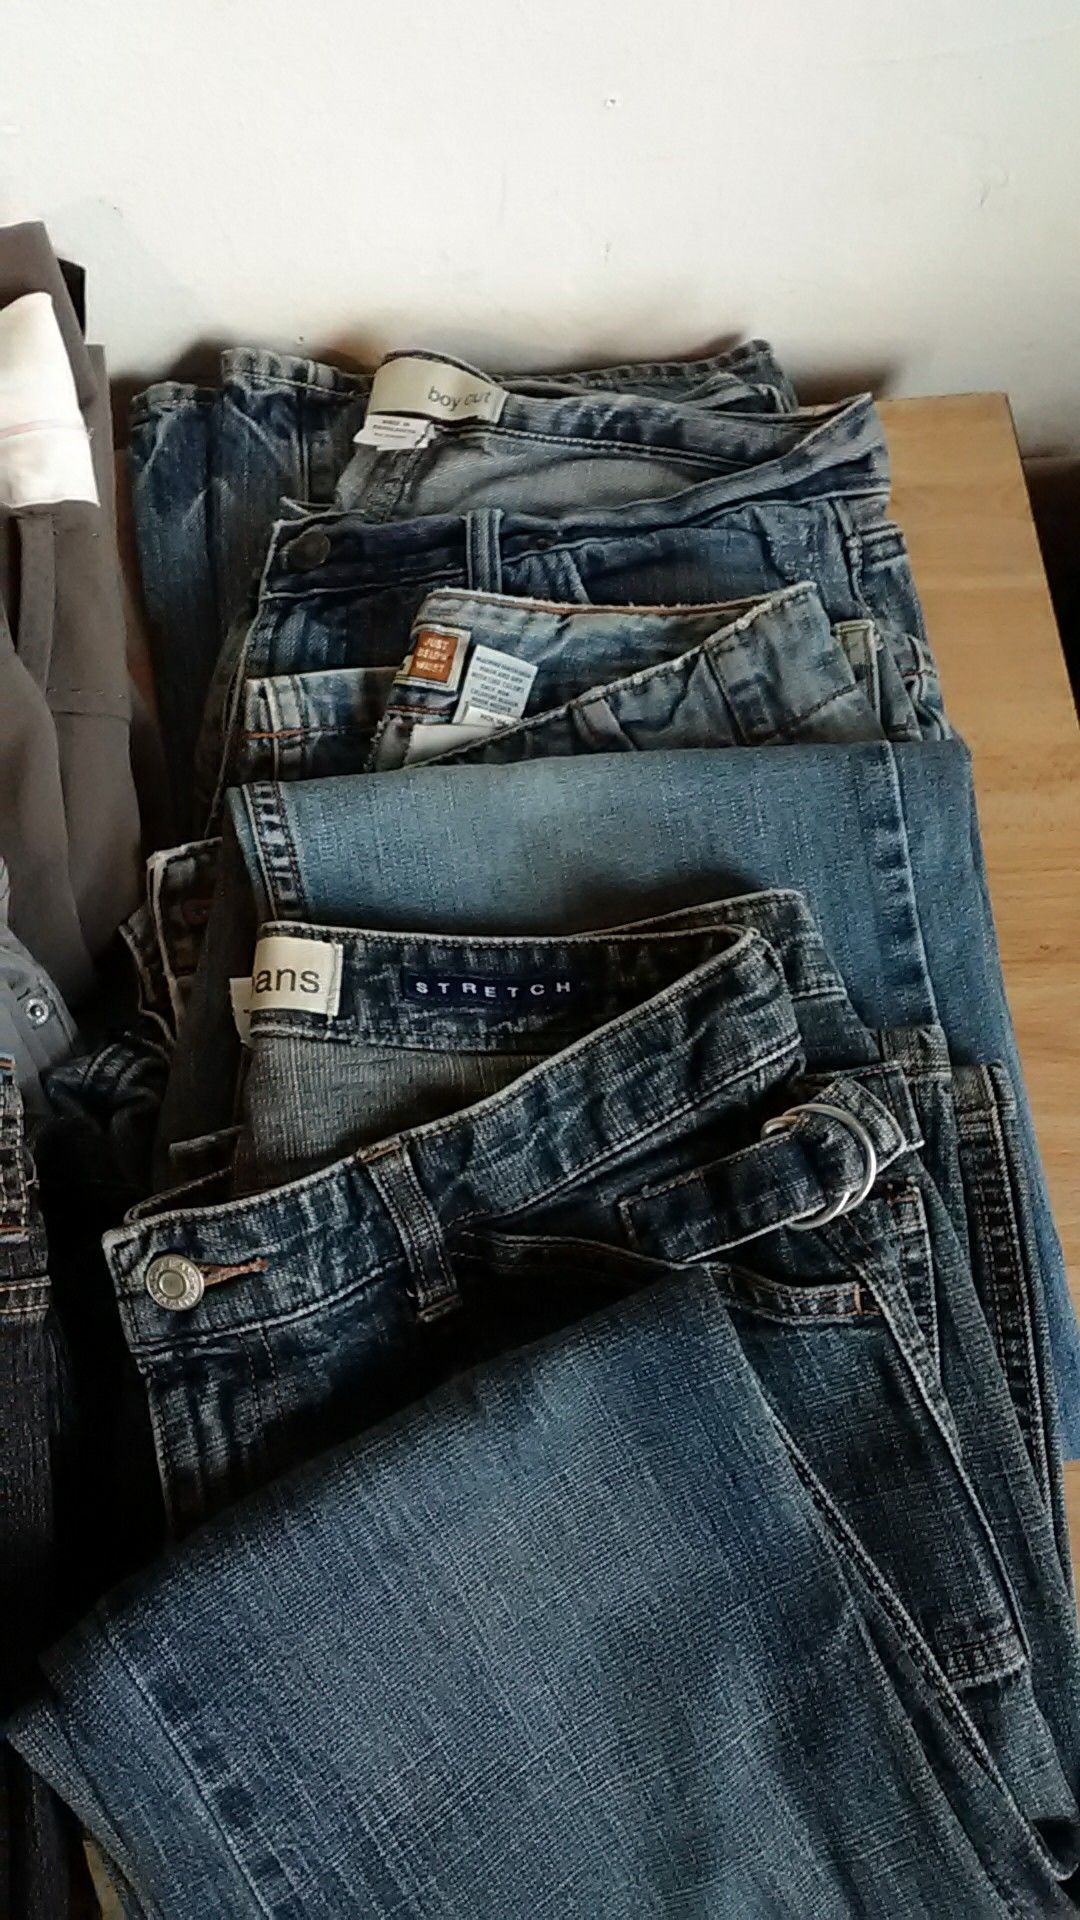 9 pair of women's size 8 jeans